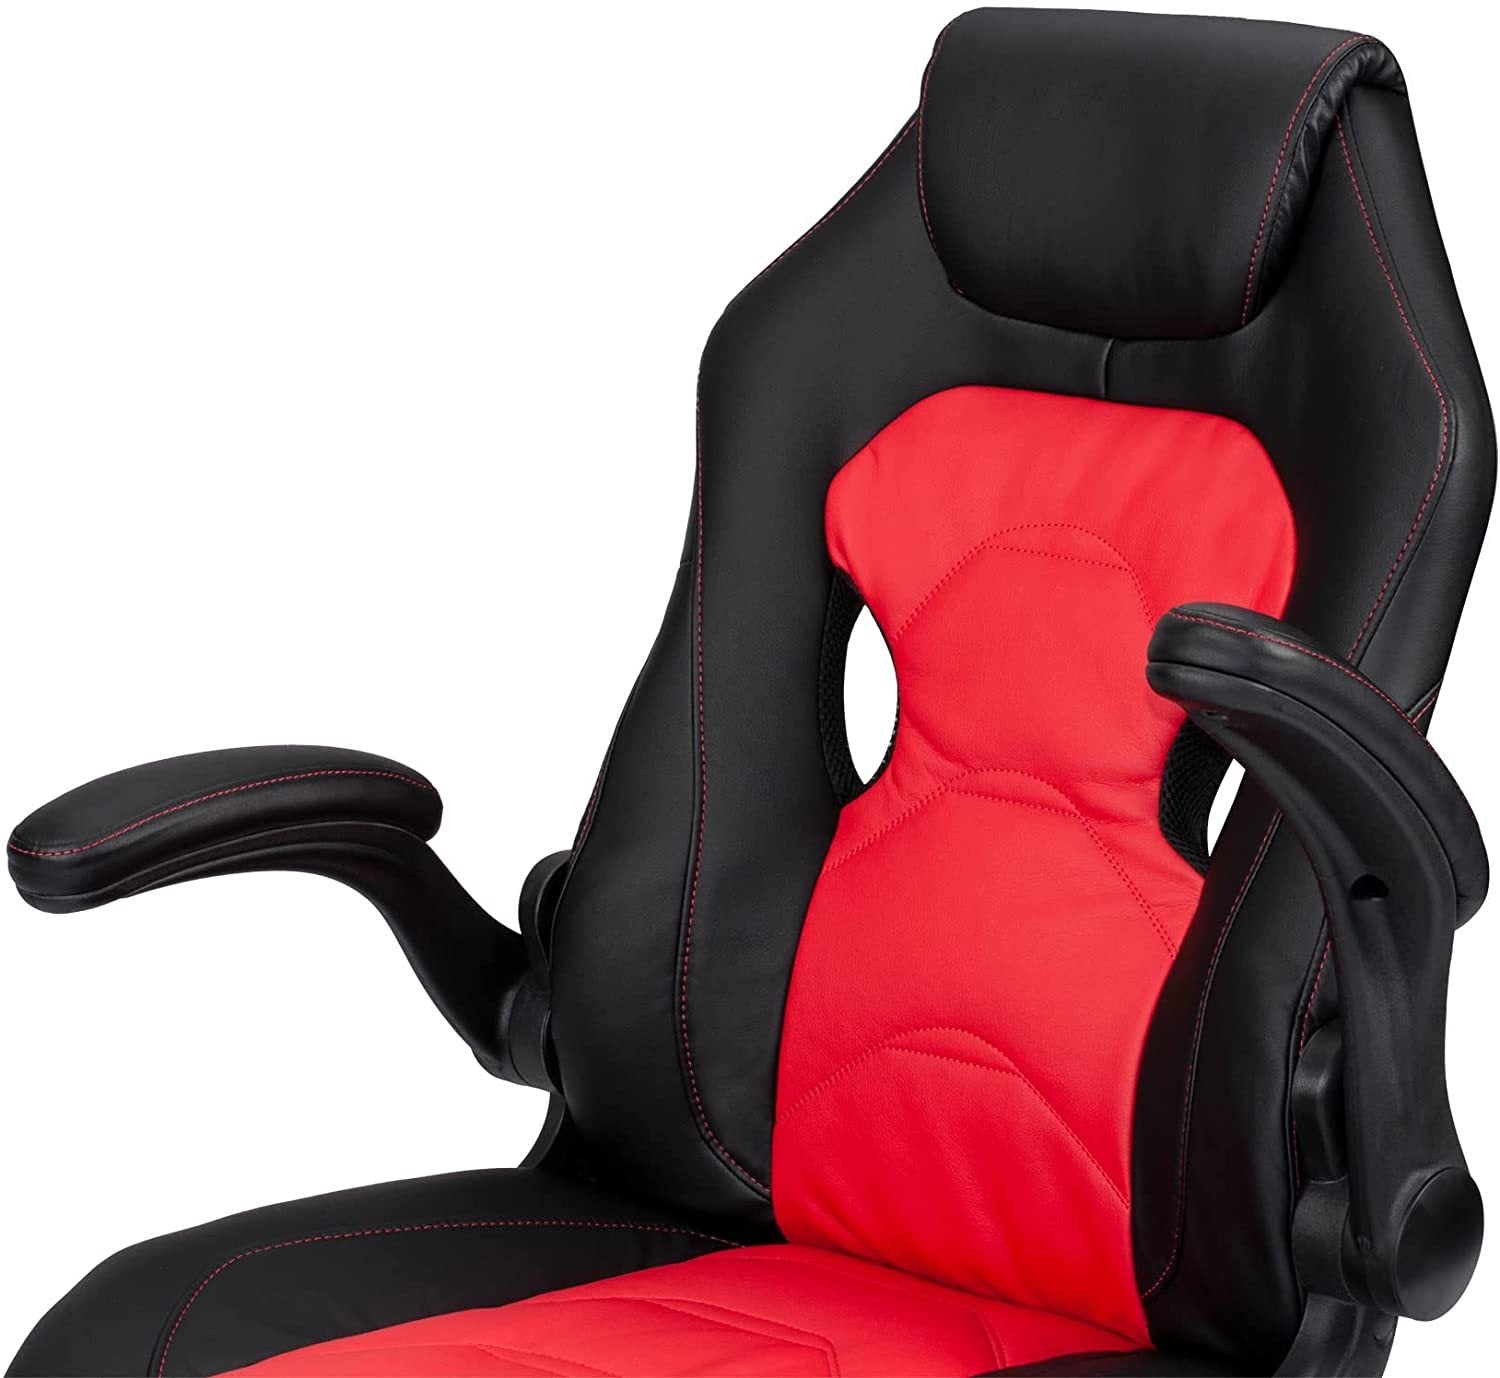 Office Chair Upholstered 1pc Comfort Chair Relax black+red-office-contemporary-modern-office